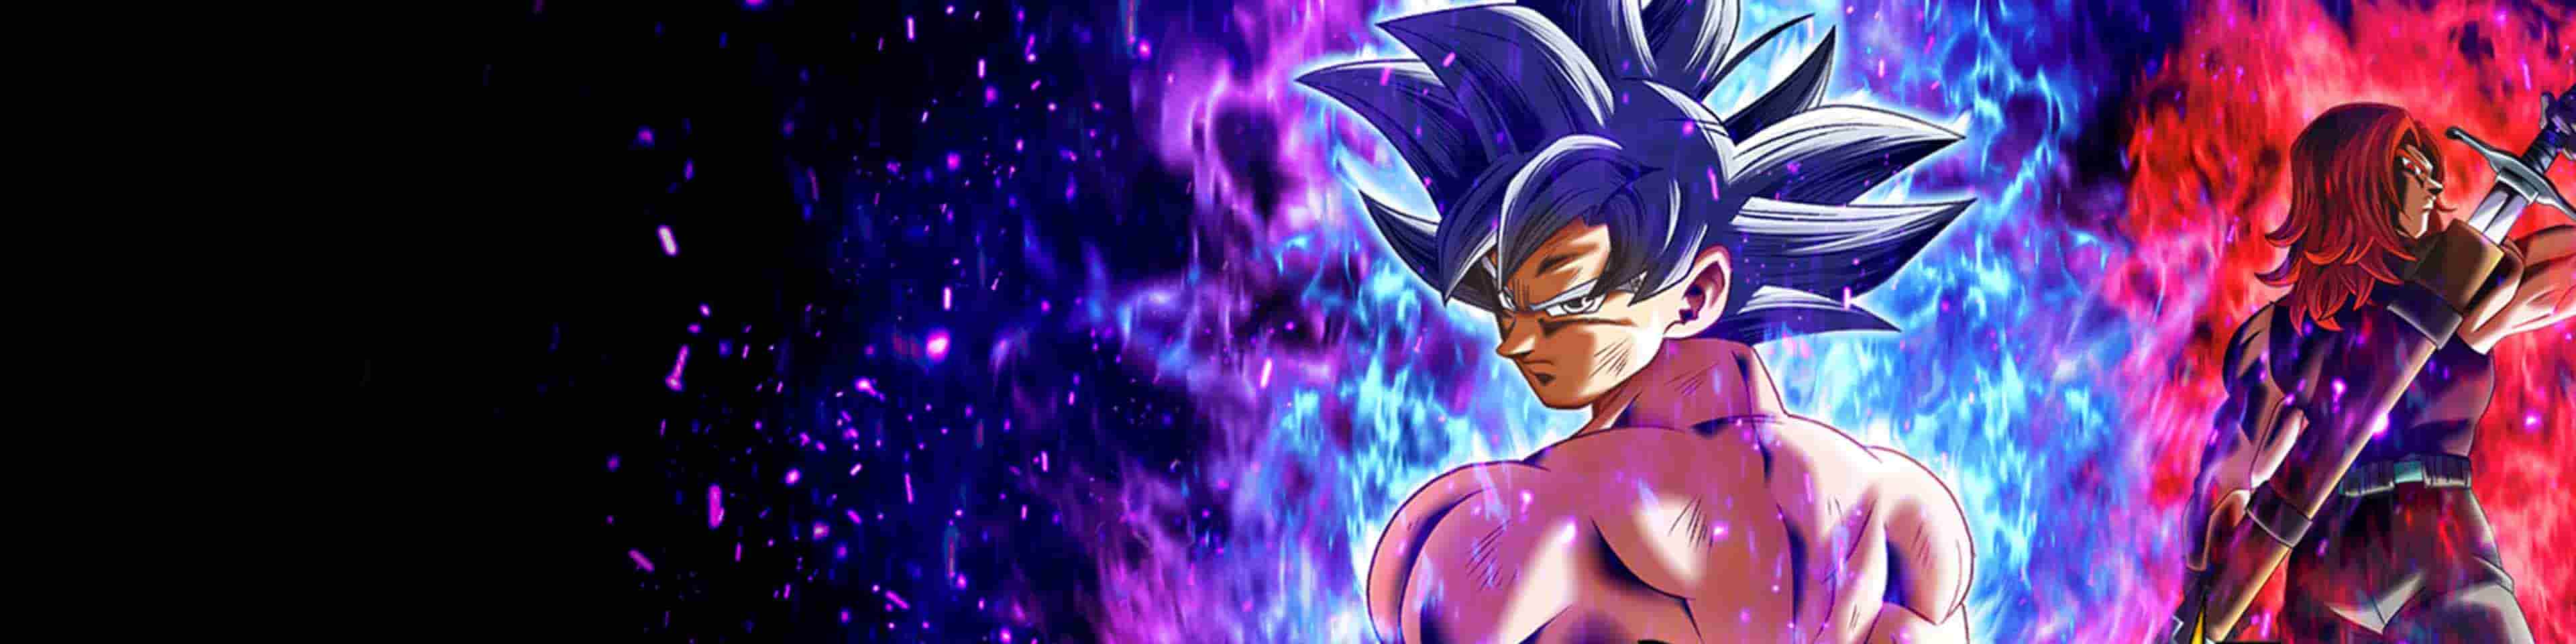 Dragonball Super Ccg Realm Of The Gods Banner_